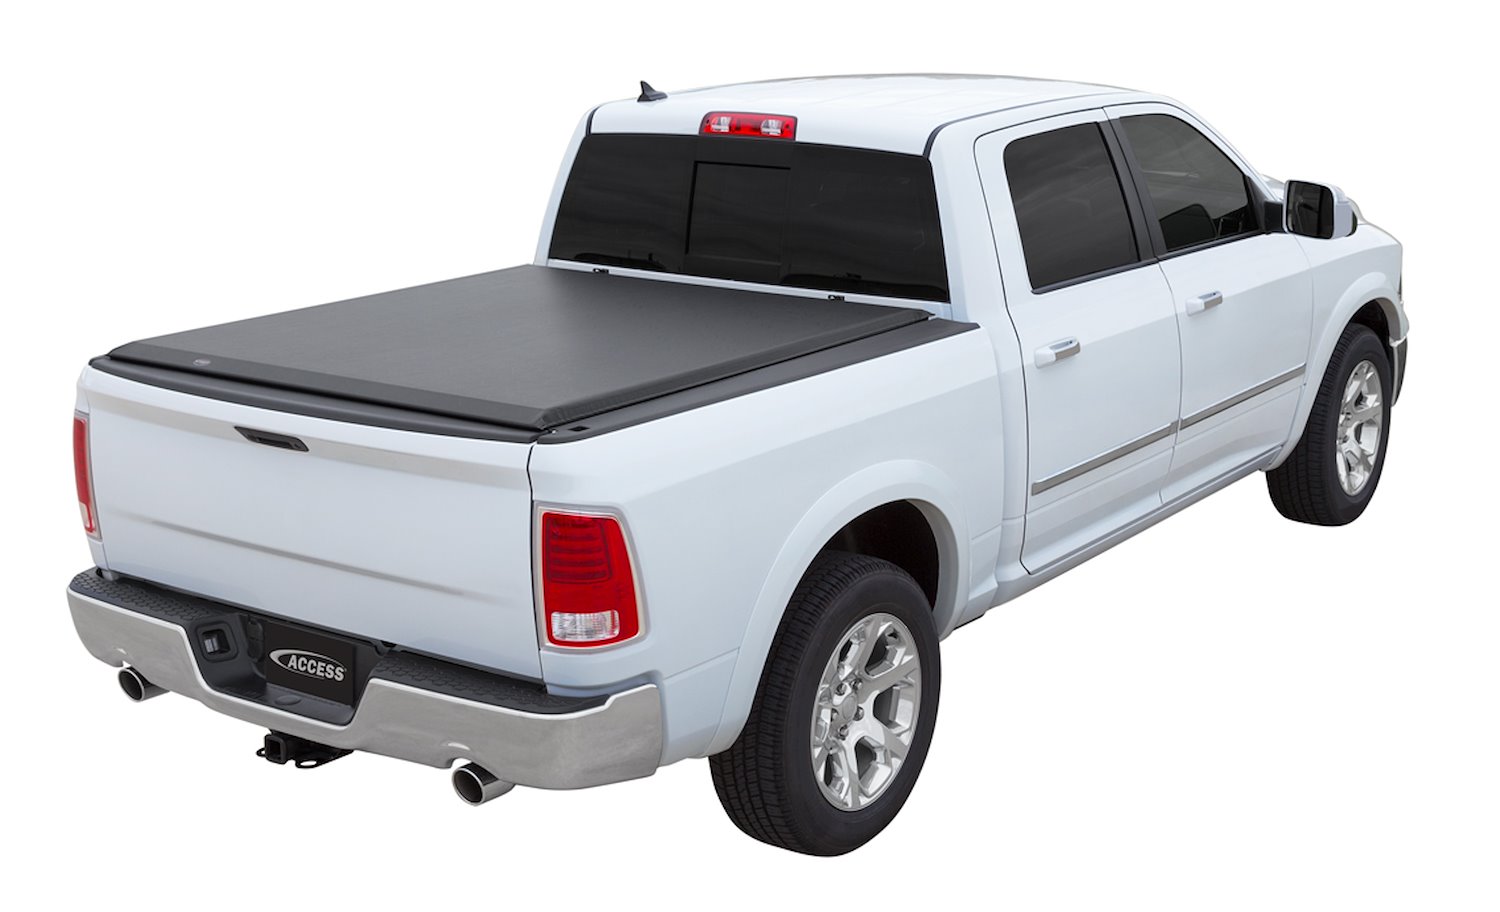 Original Roll-Up Tonneau Cover, 2002-2008 Dodge Ram 1500, 2003-2009 Dodge Ram 2500/3500, with 6 ft. 4 in. Bed